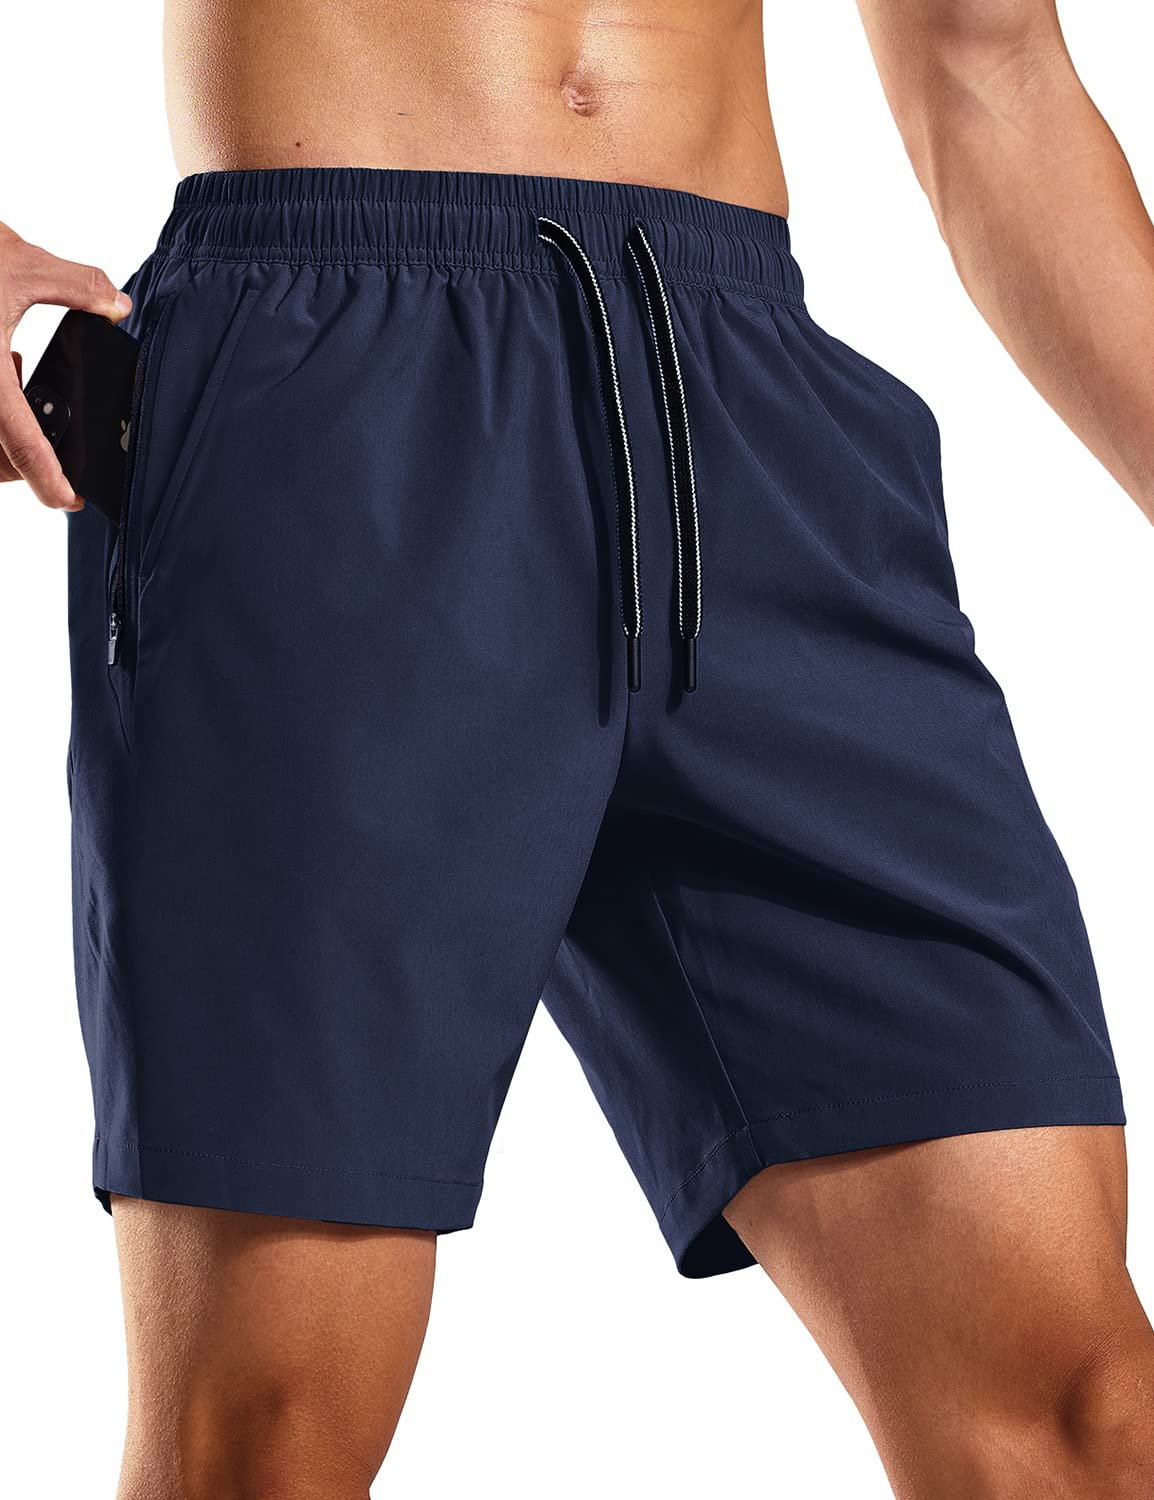 MIER Men's Workout Running Shorts 7 Inch Lightweight Athletic with